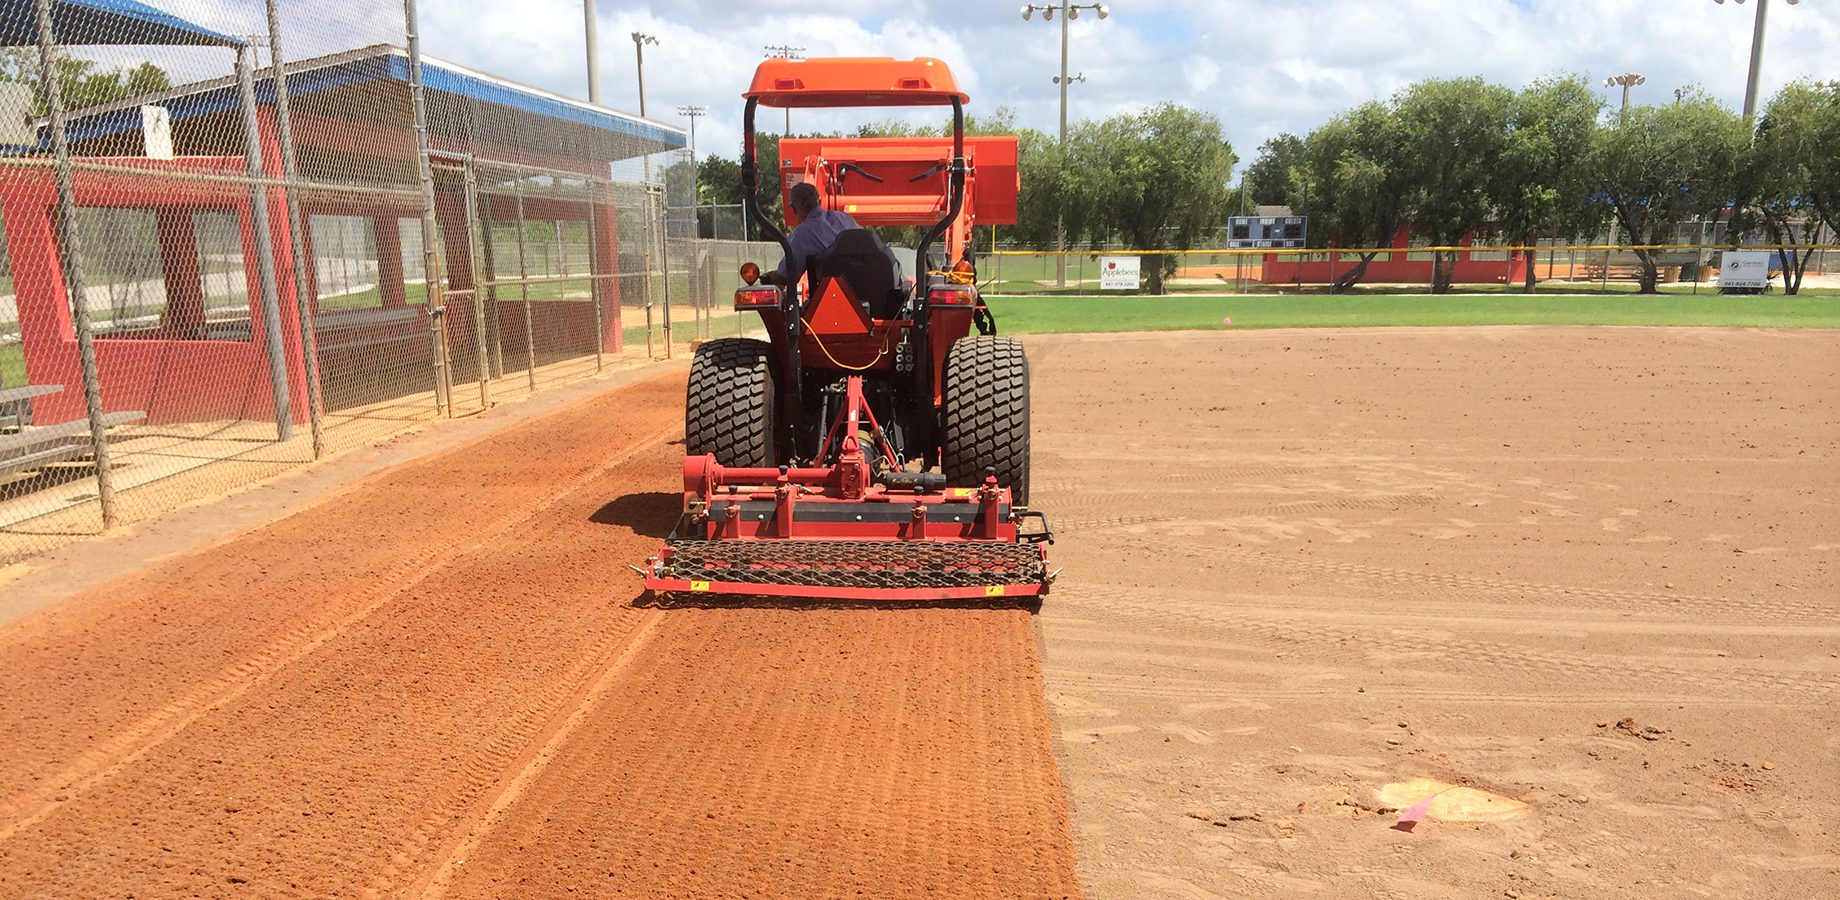 preparing the infield by leveling the dirt